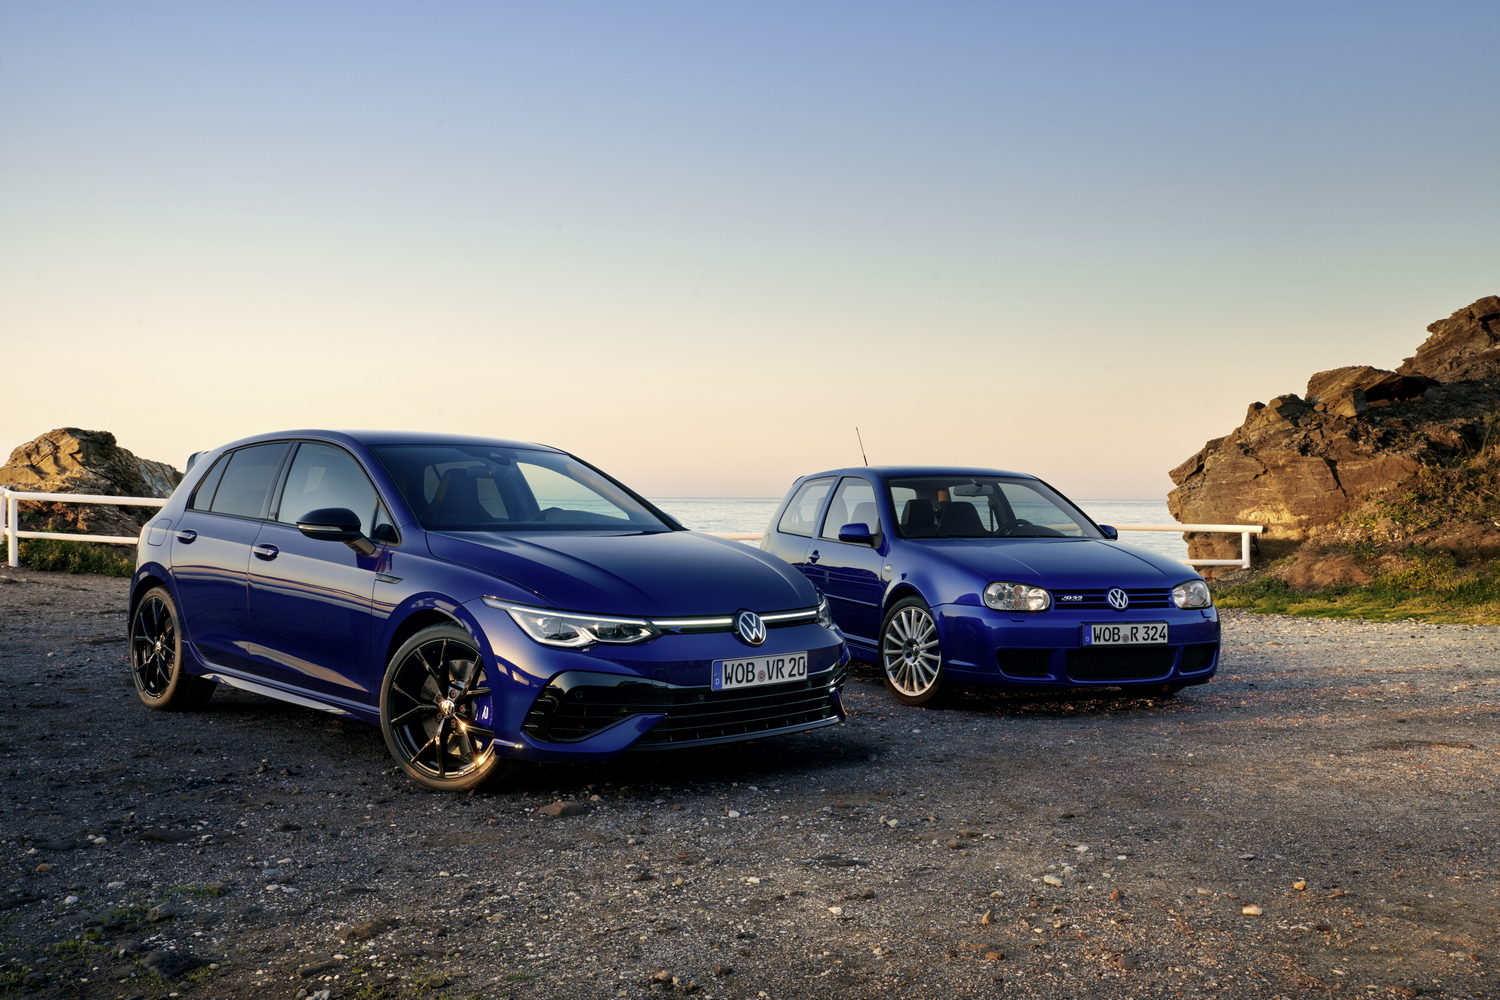 VW celebrates 20 years of the Golf R